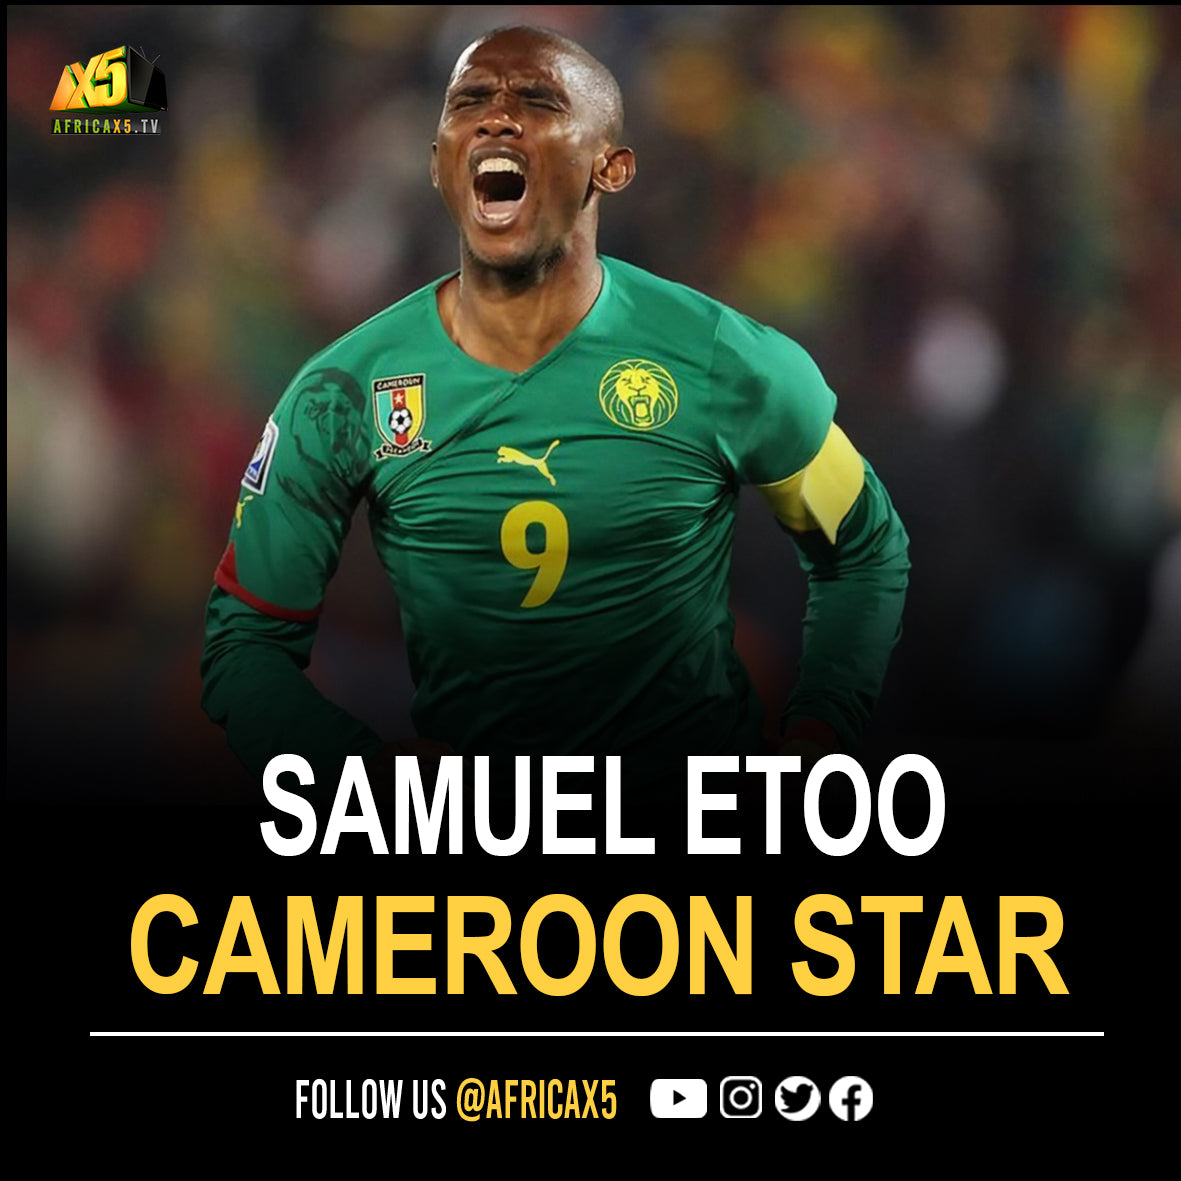 Cameroon's Football Federation, led by Samuel Eto'o, has reacted to a publication by Radio France International that the African country is planning on hiring black magicians to boost the fortunes of the lions in the upcoming World Cup in Qatar.